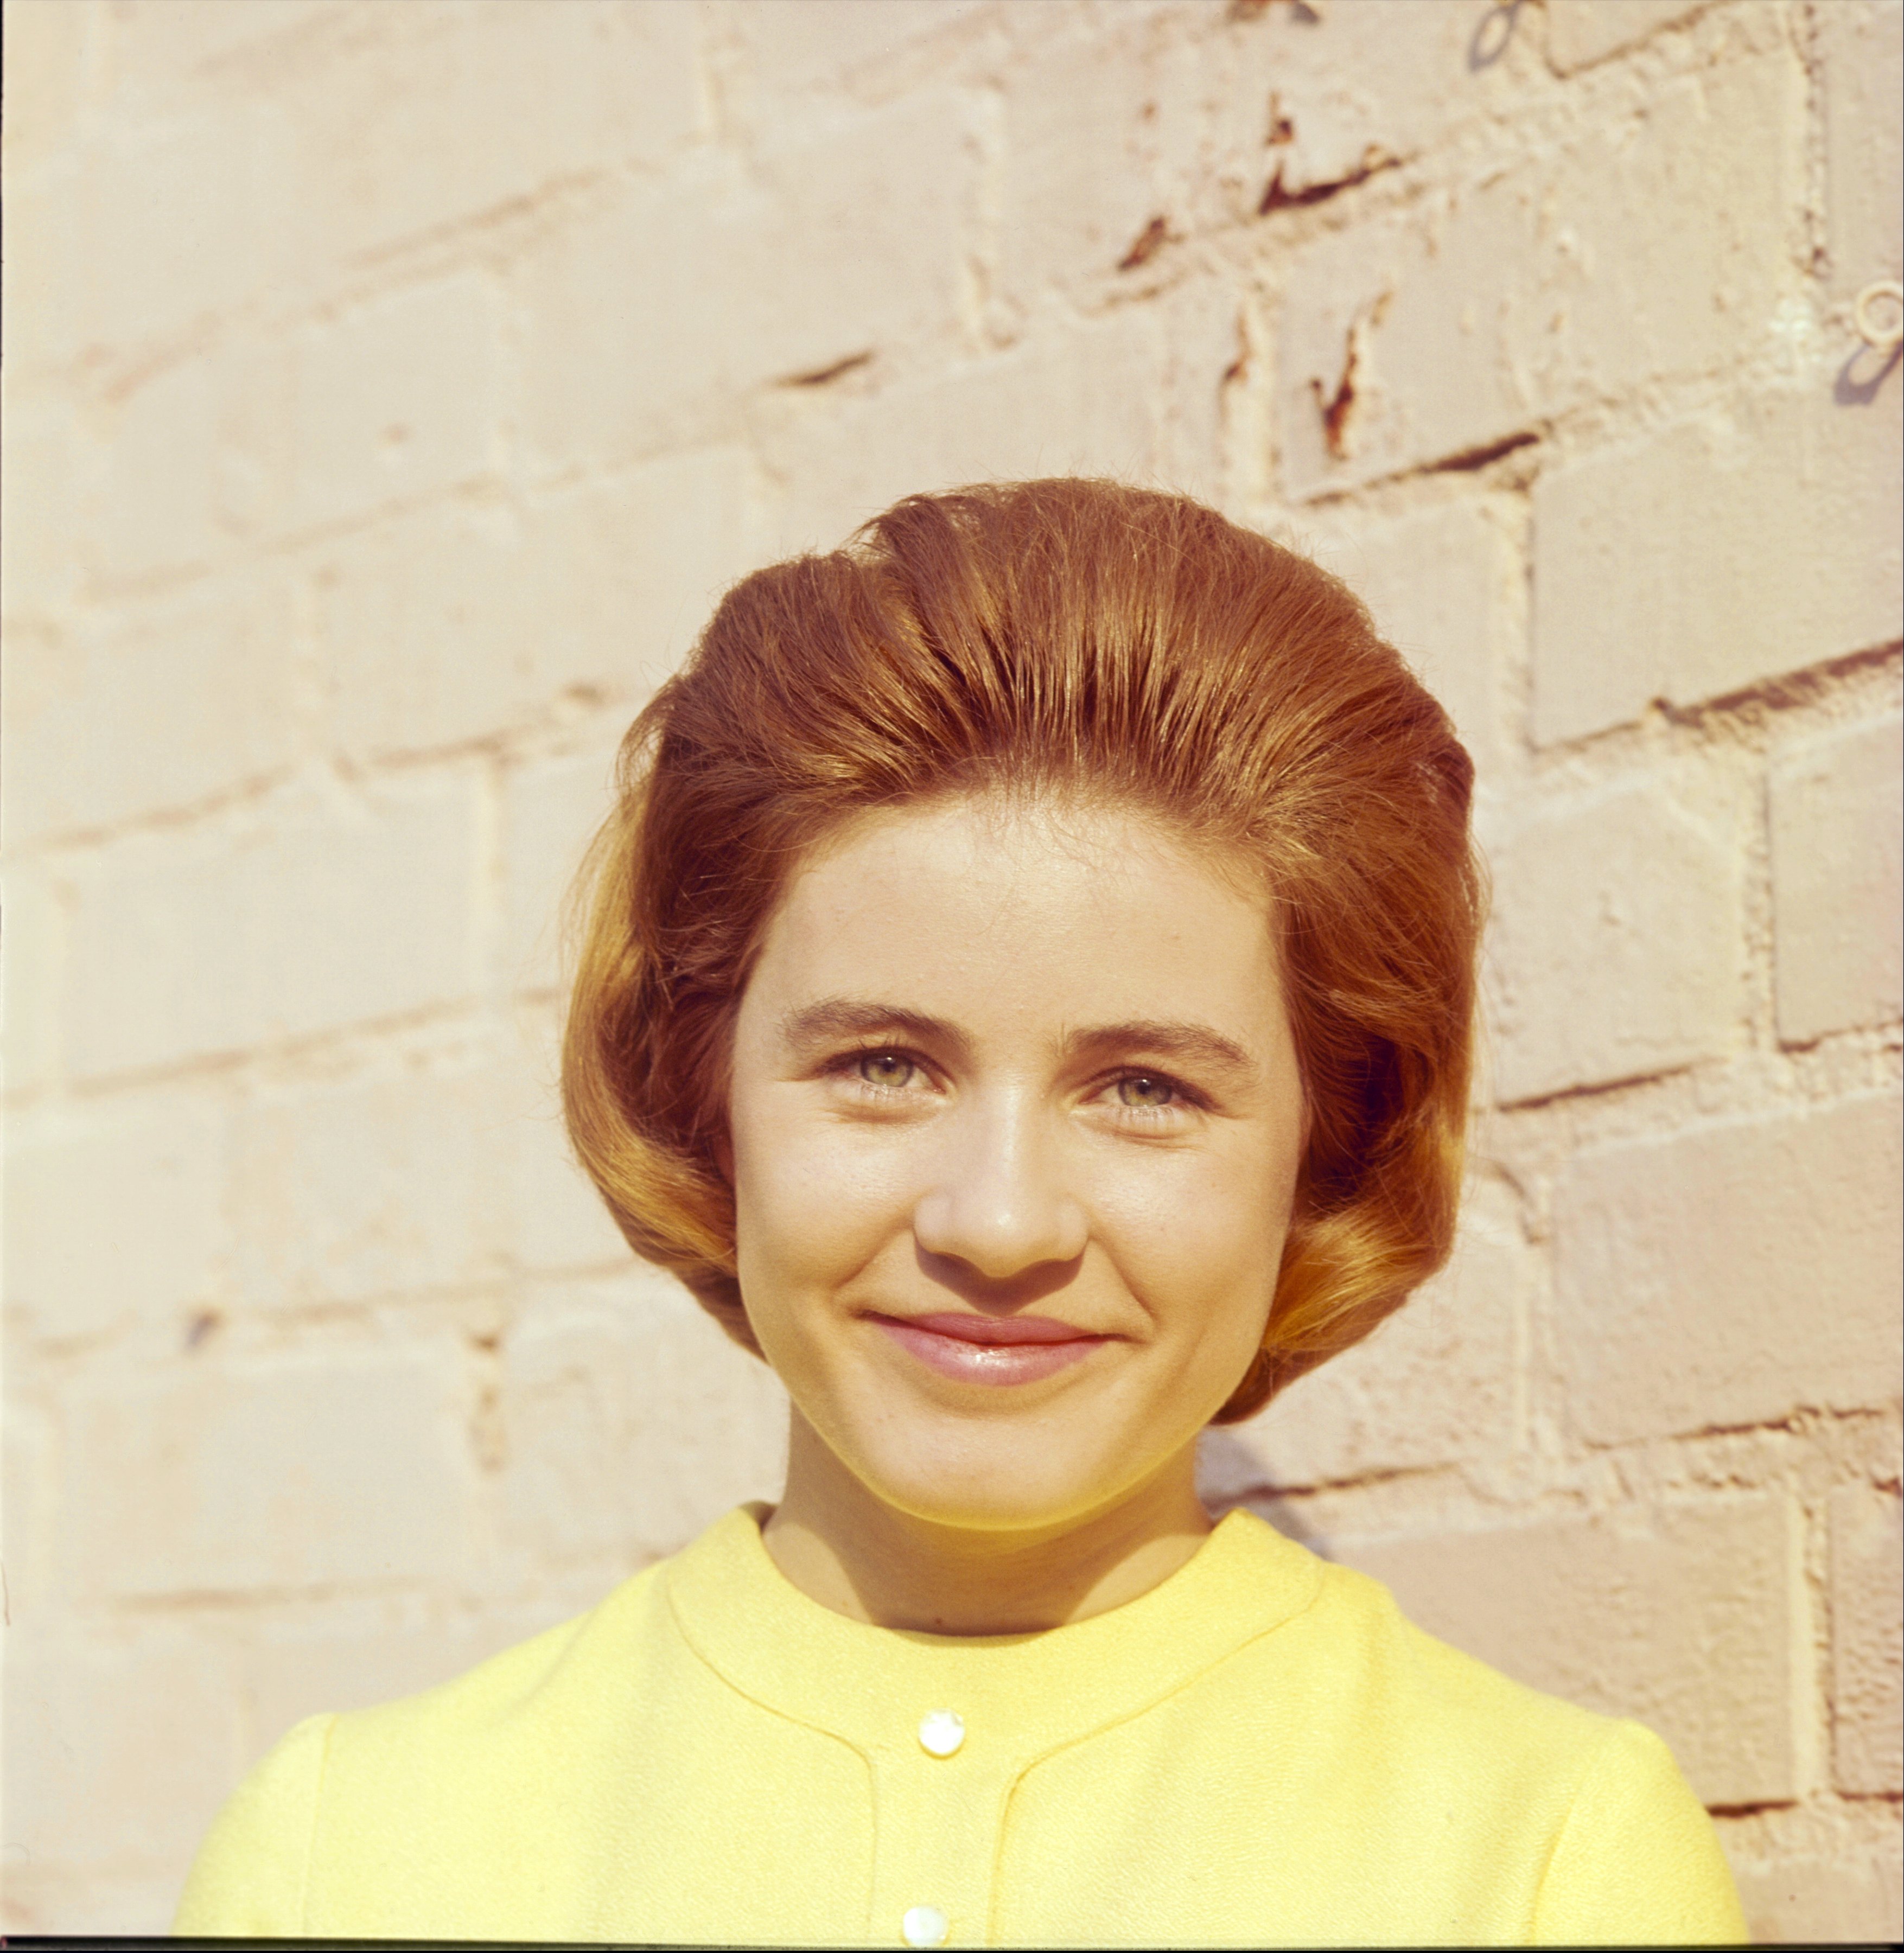 Patty Duke during "The Patty Duke" show. | Source: Getty Images